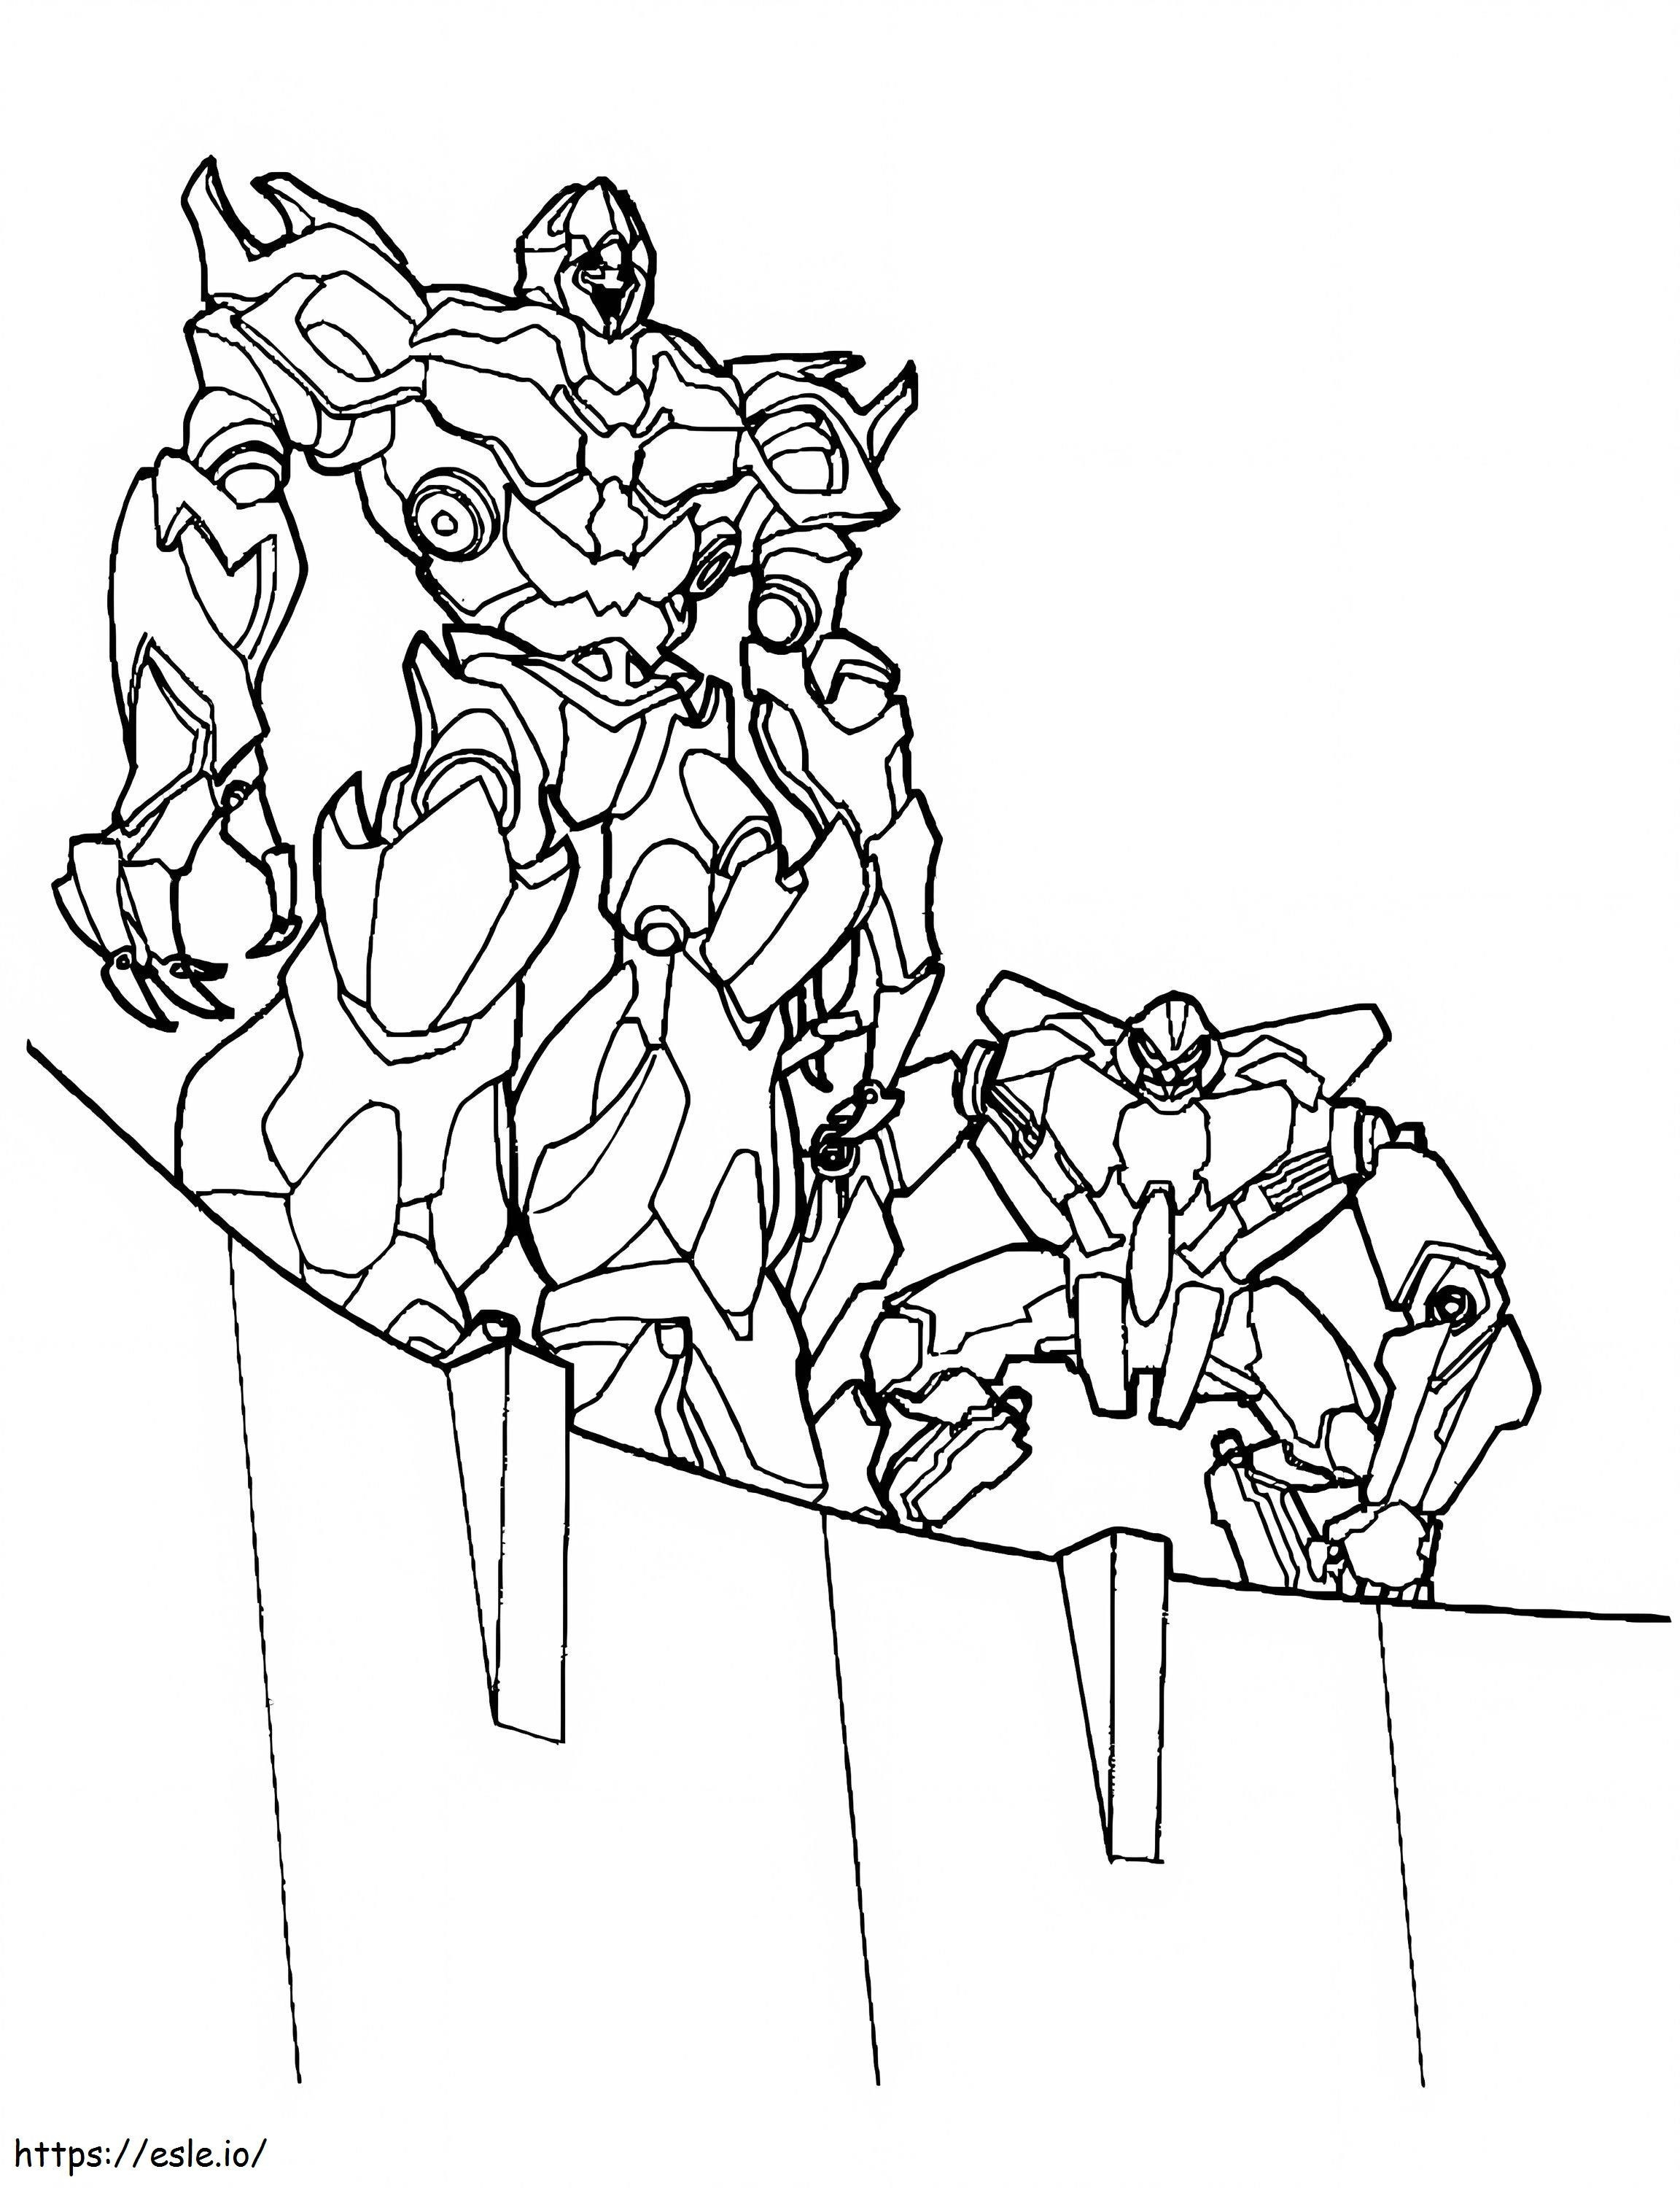 Starscream And Megatron coloring page